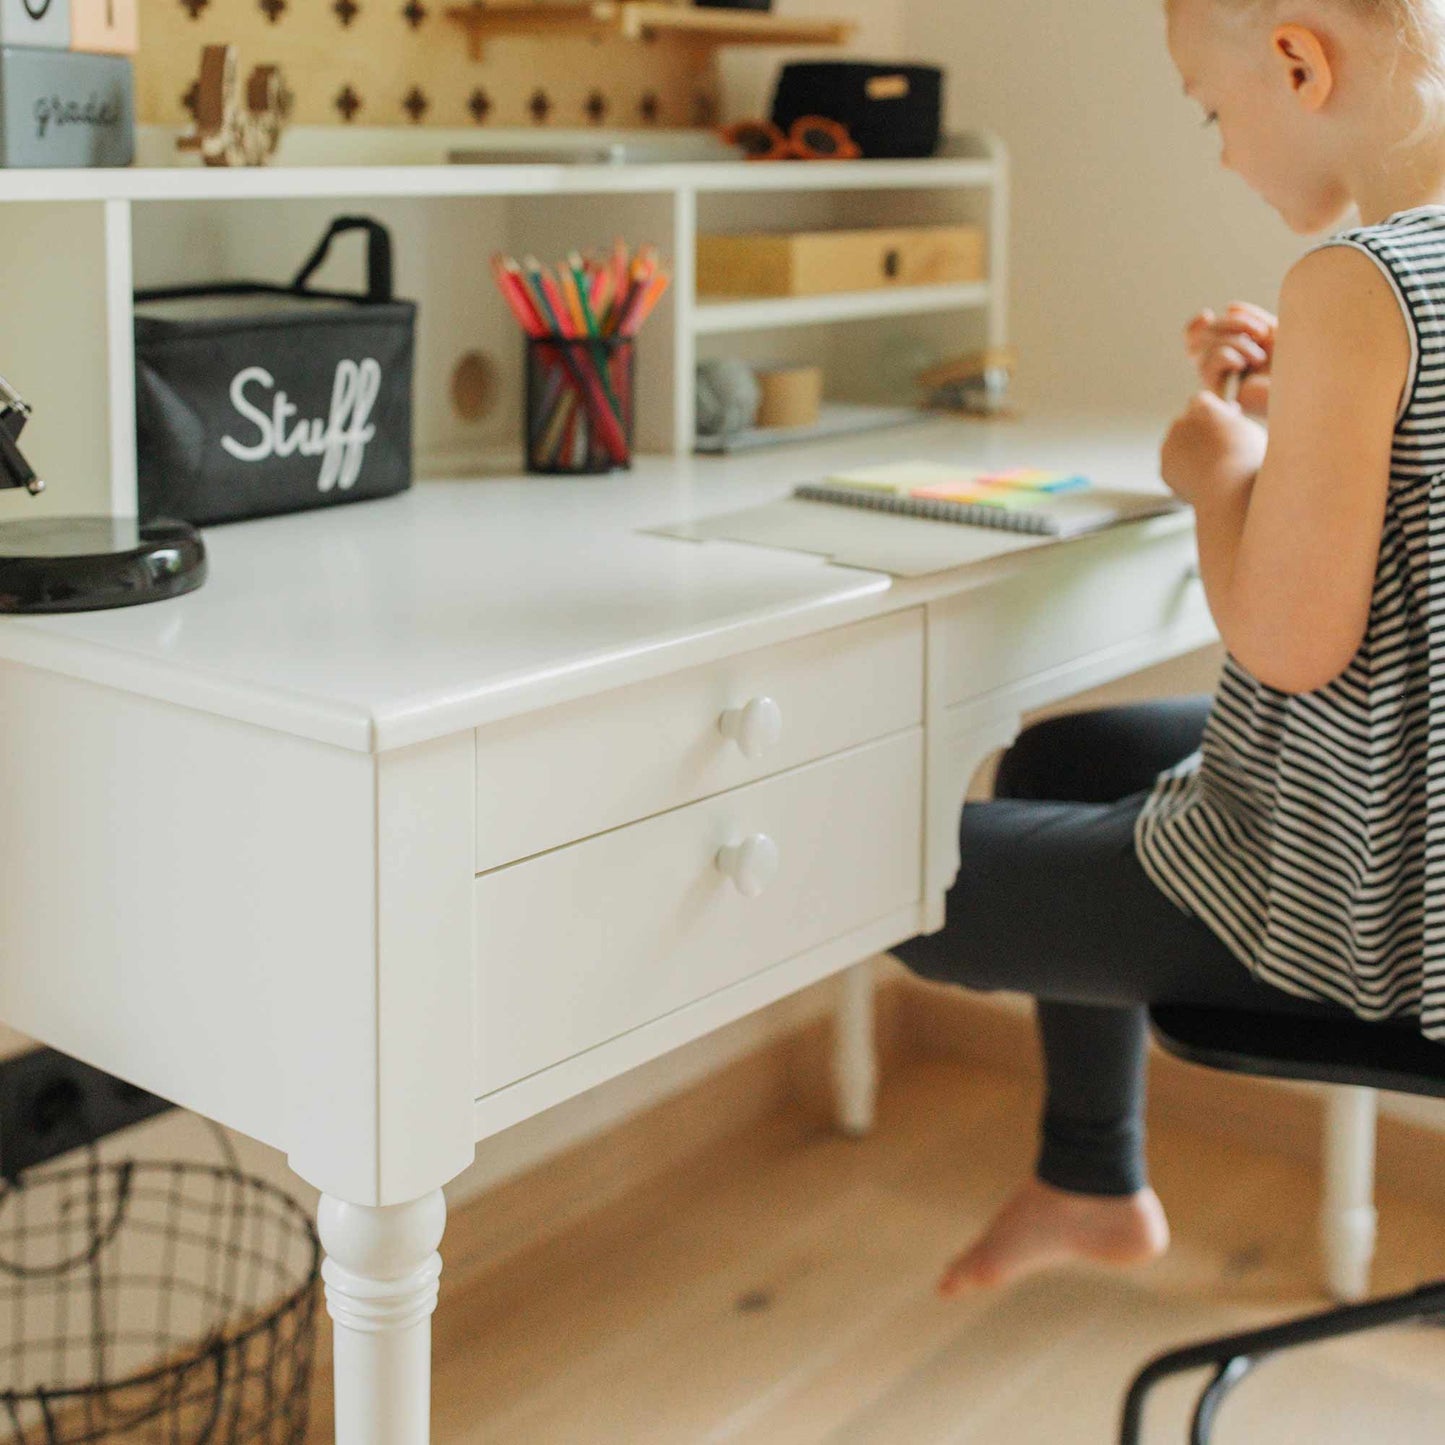 A child sits at the "Table with a Hutch, Pedestal Desk" with shelves and drawers, holding colored pencils and drawing in a notebook. This versatile desk features excellent cable management and ample storage space, perfect for keeping things tidy and organized.